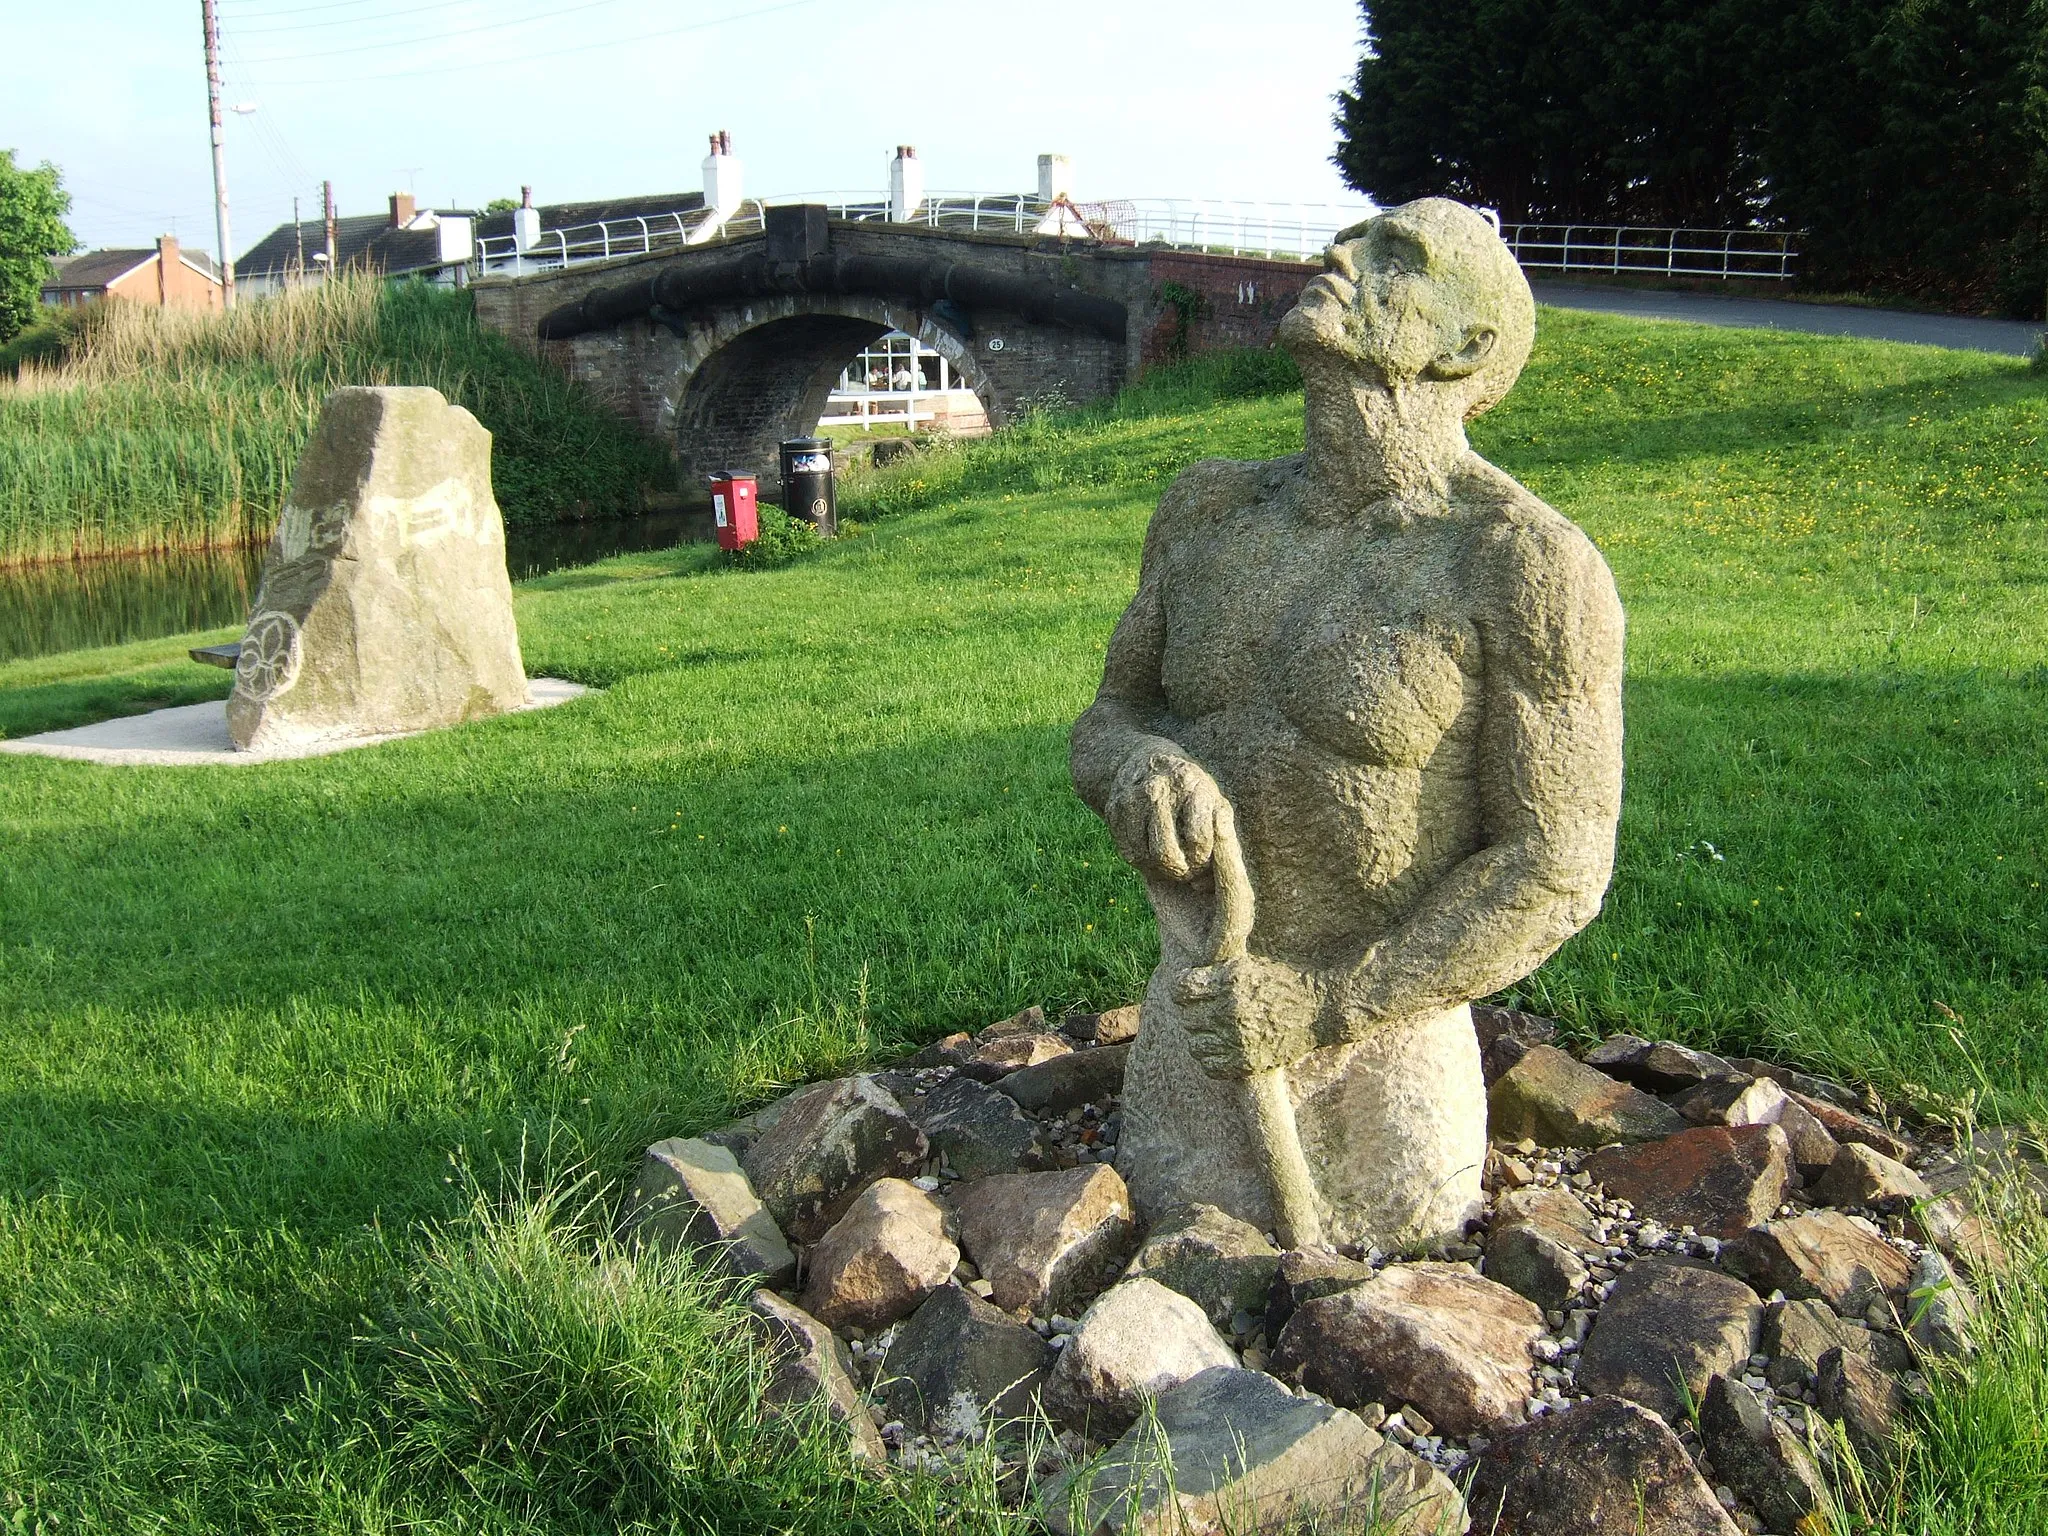 Photo showing: The "Halsall Navvy" by Thompson Dagnall, situated near the Saracen's Head pub in Halsall, Lancashire, England, where the first sod was cut on the Leeds and Liverpool Canal.